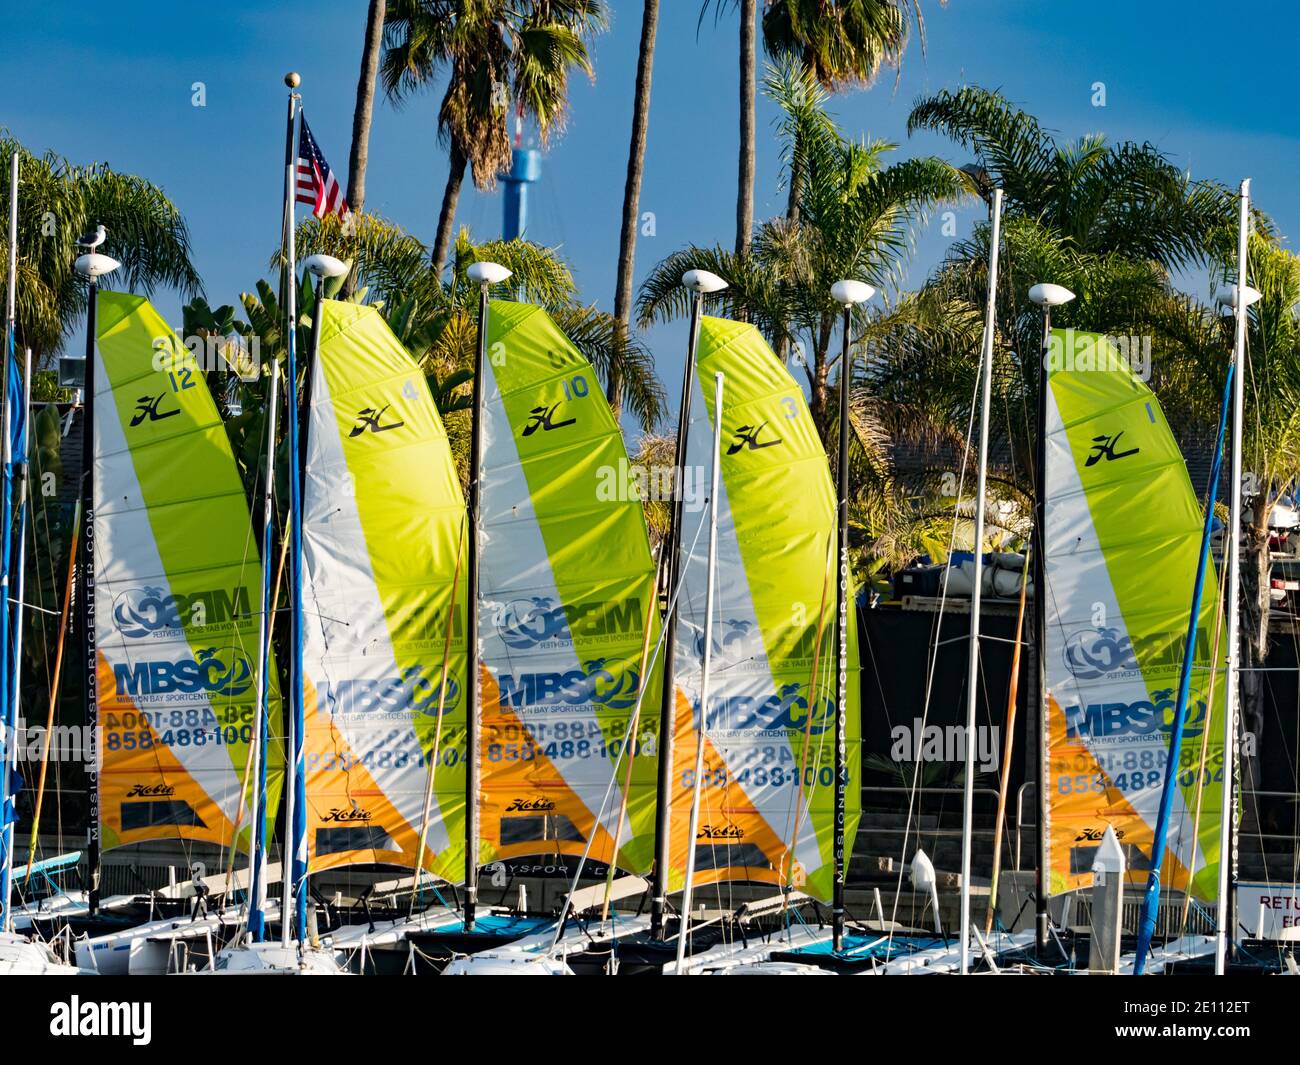 Sailboats for rent at Mission Bay sportcenter, Mission beach, San Diego, California Stock Photo